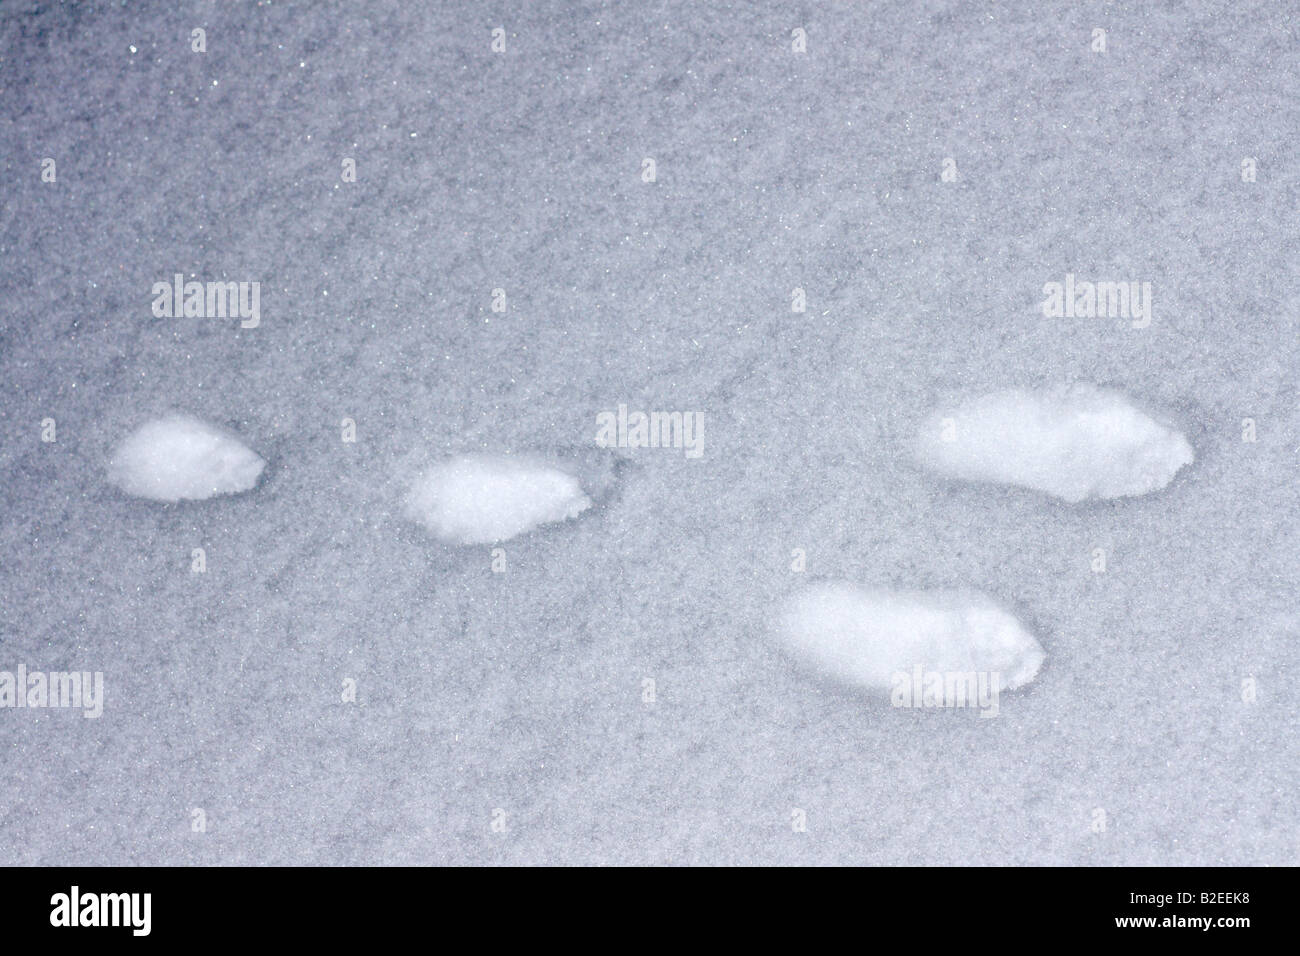 Snowshoe Hare or rabbit tracks in the snow Stock Photo